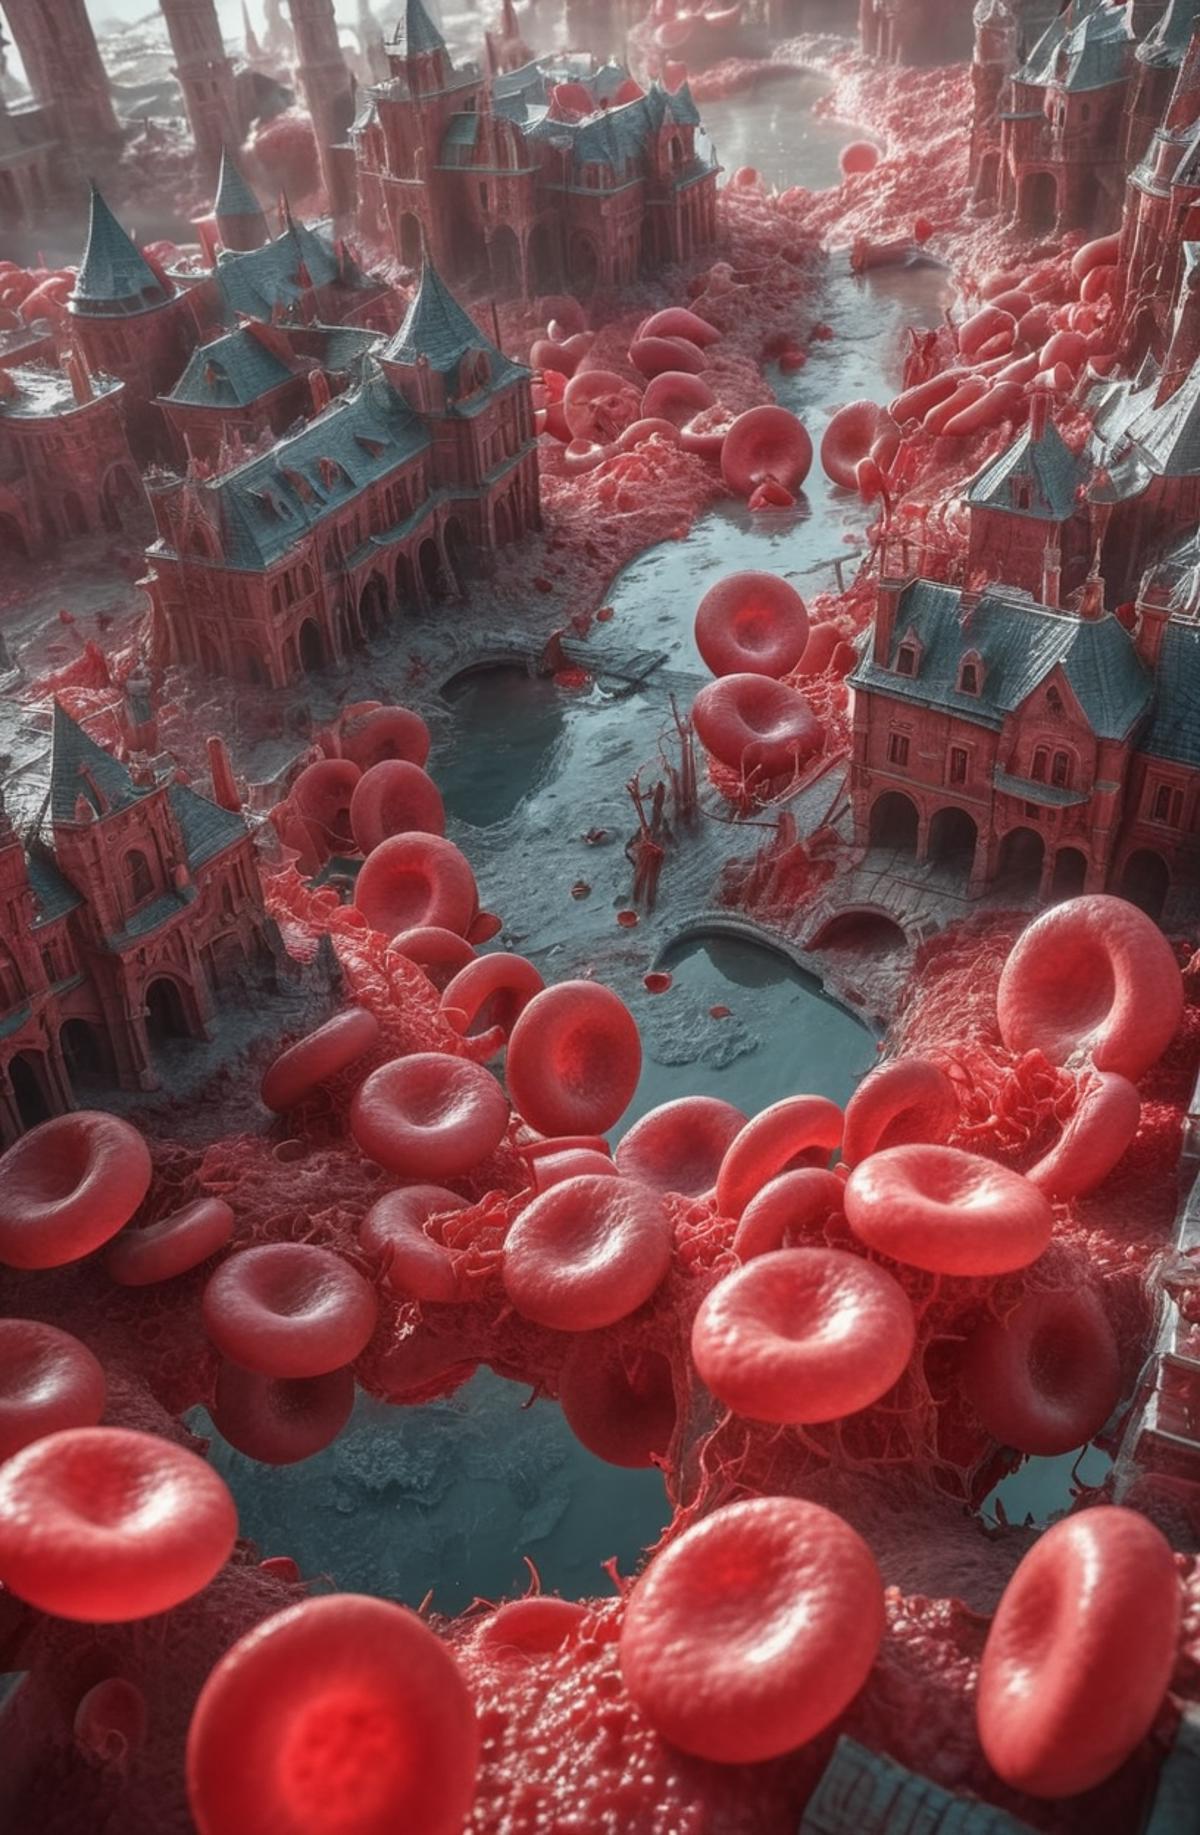 A red and white 3D model of a city with a pink river running through it, filled with red blood cells.